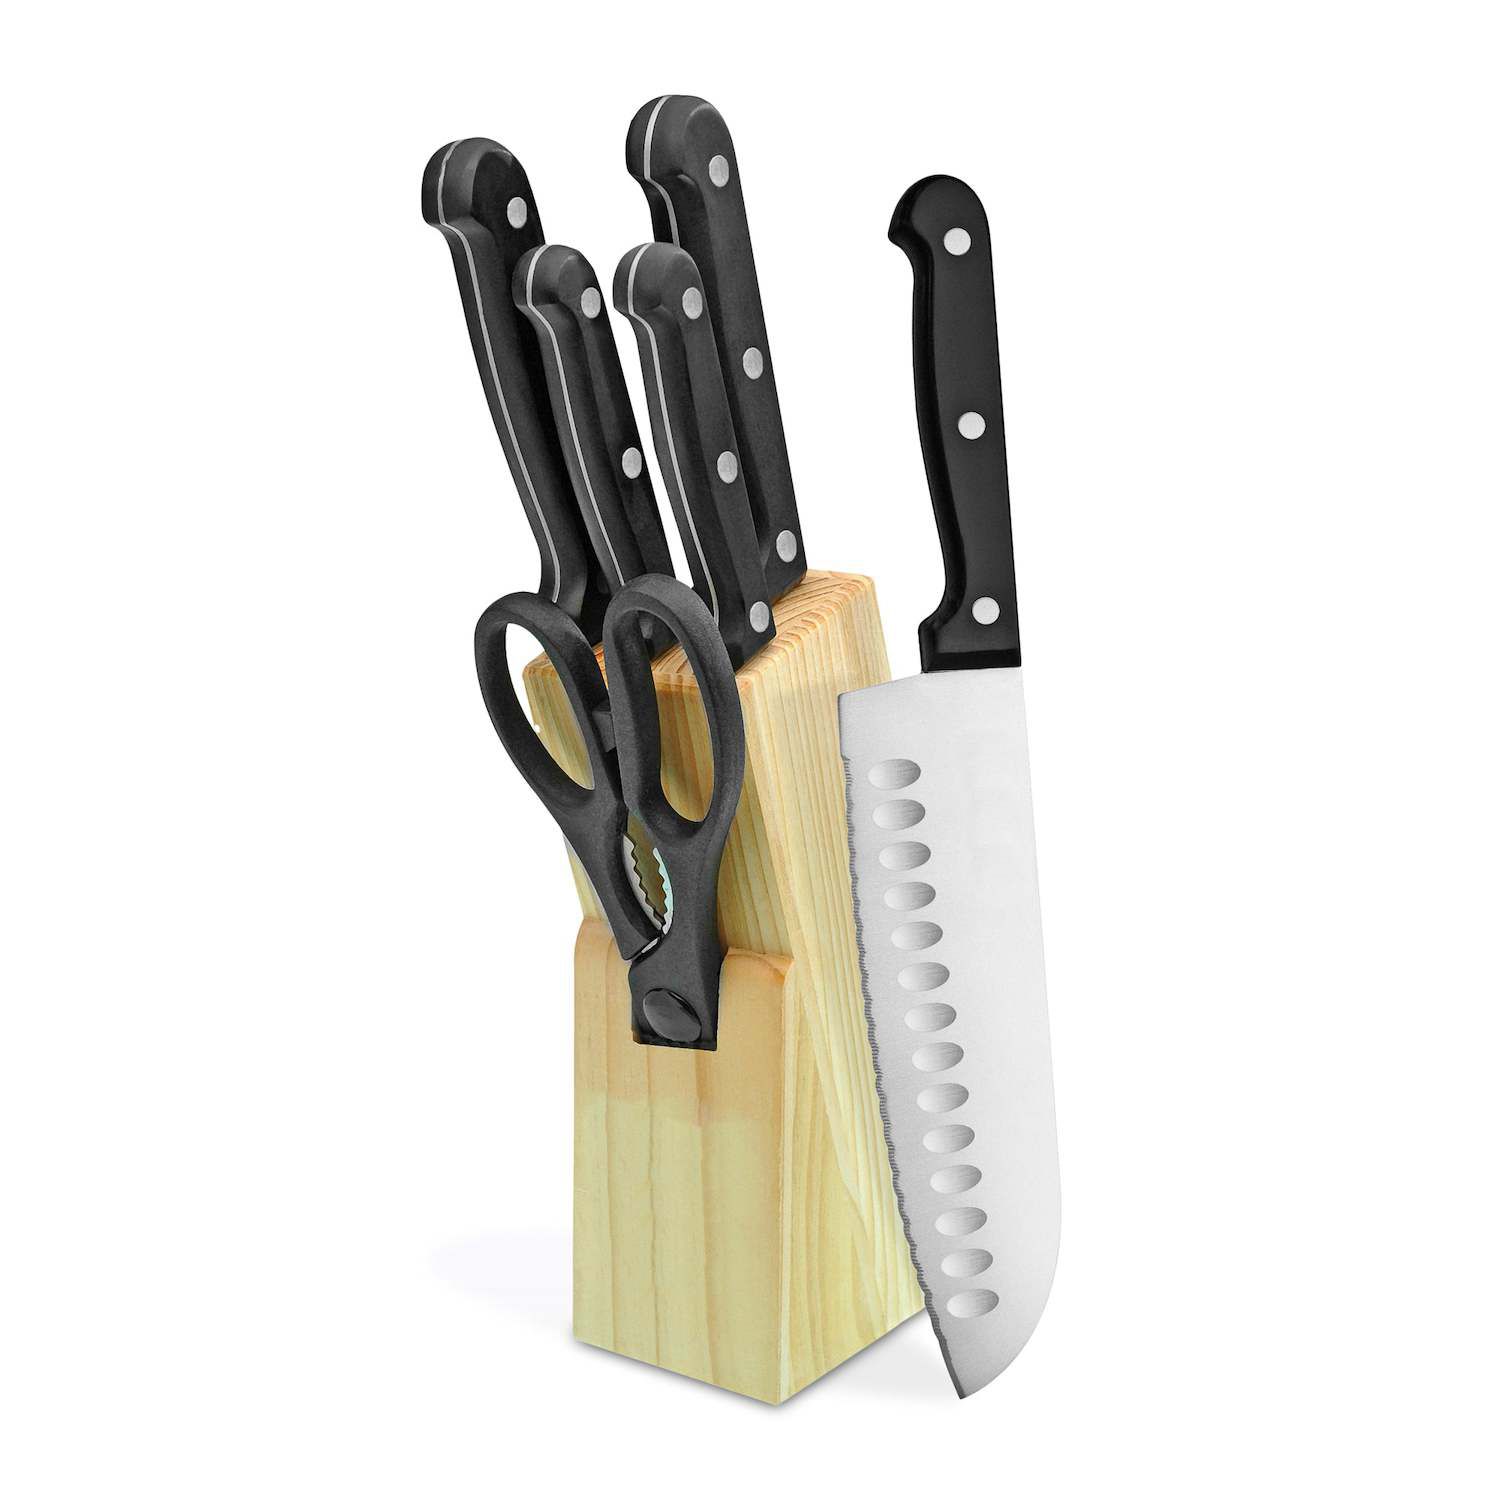 This Nested Knife Set is Amazing